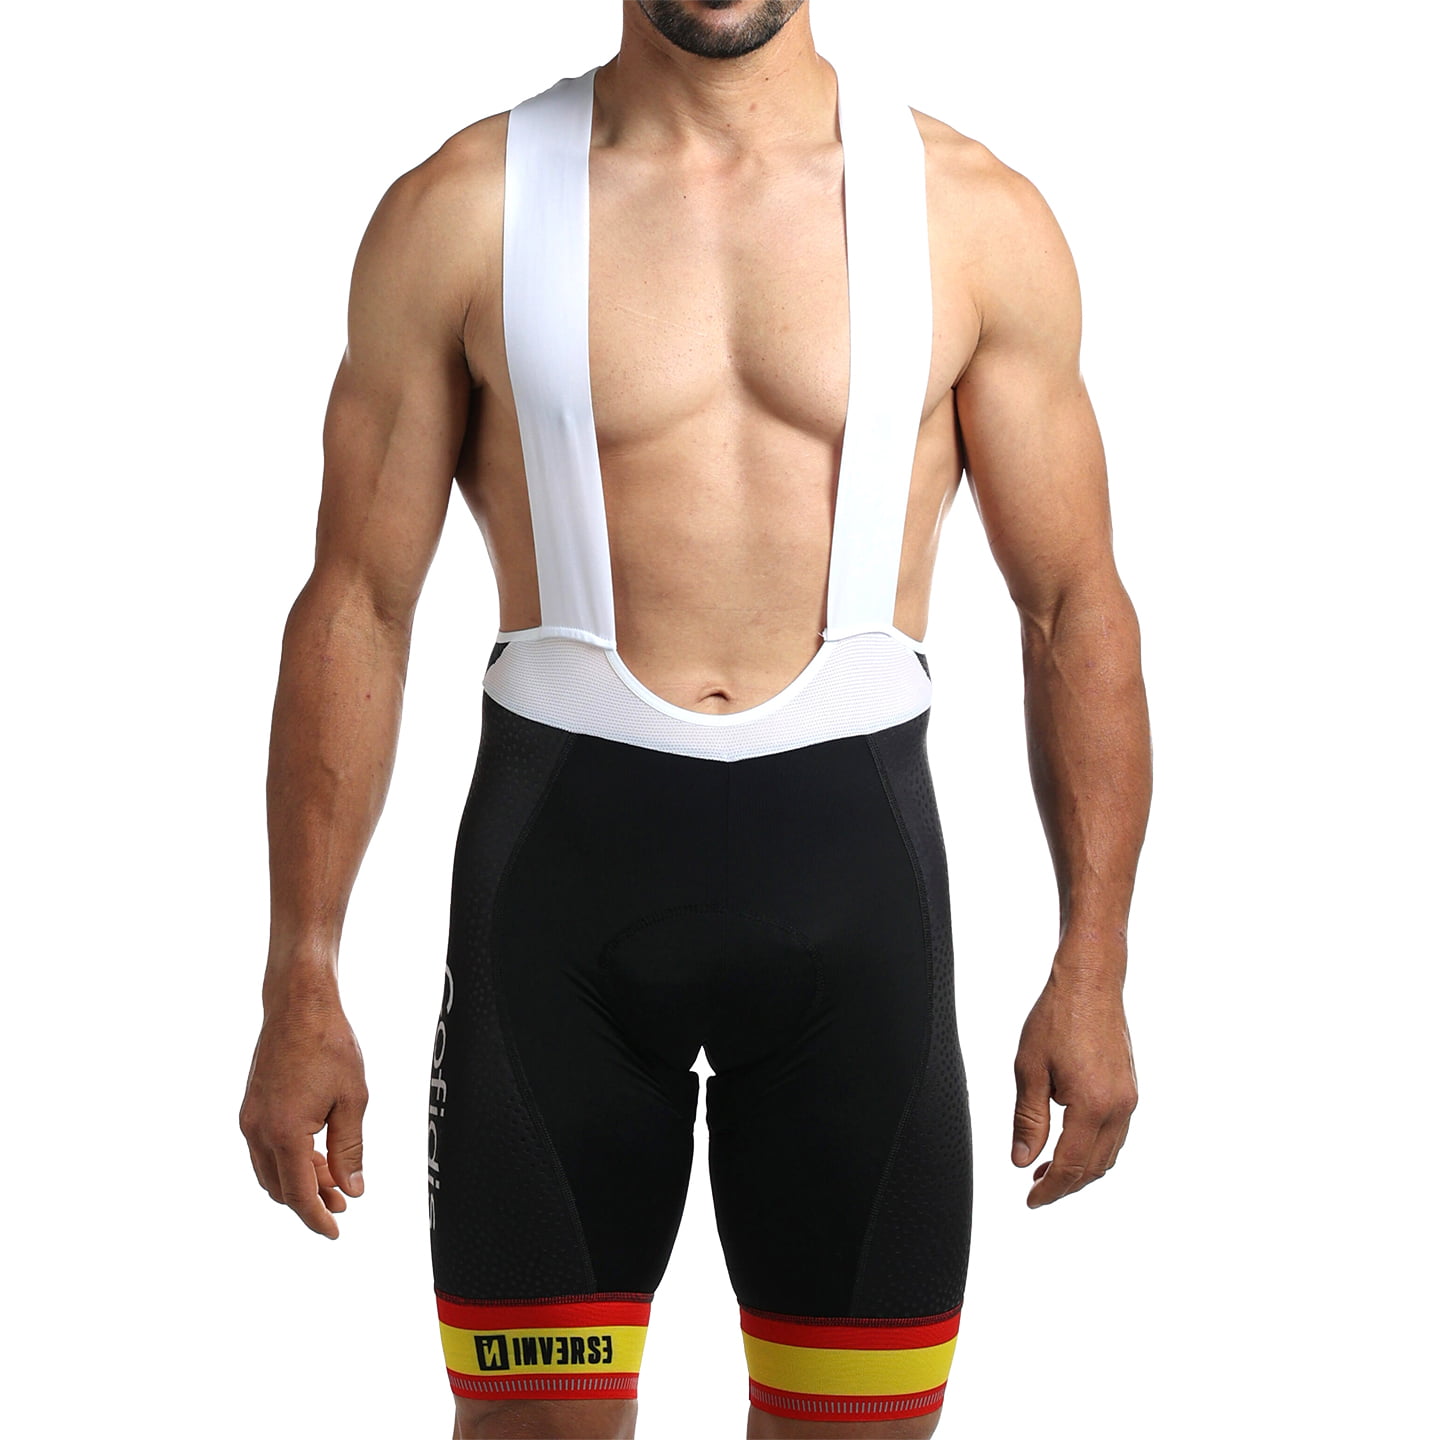 SPANISH NATIONAL TEAM 2024 Bib Shorts, for men, size XL, Cycle trousers, Cycle clothing